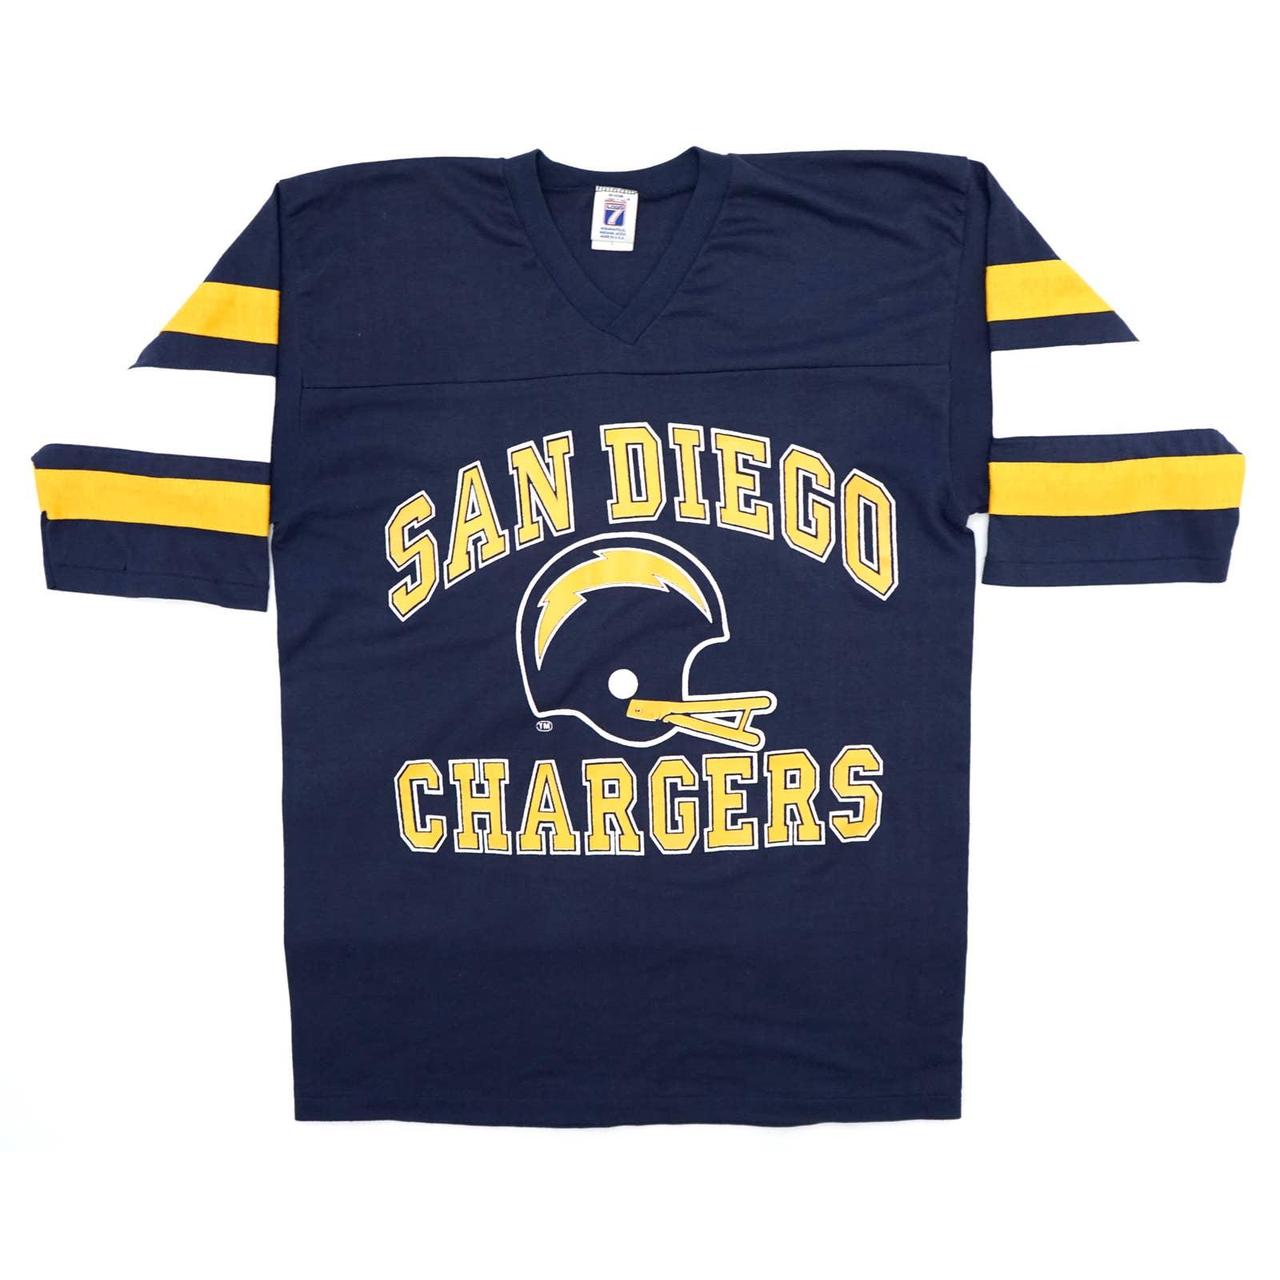 Vintage 90s San Diego Chargers LOGO 7 shirt jersey. - Depop